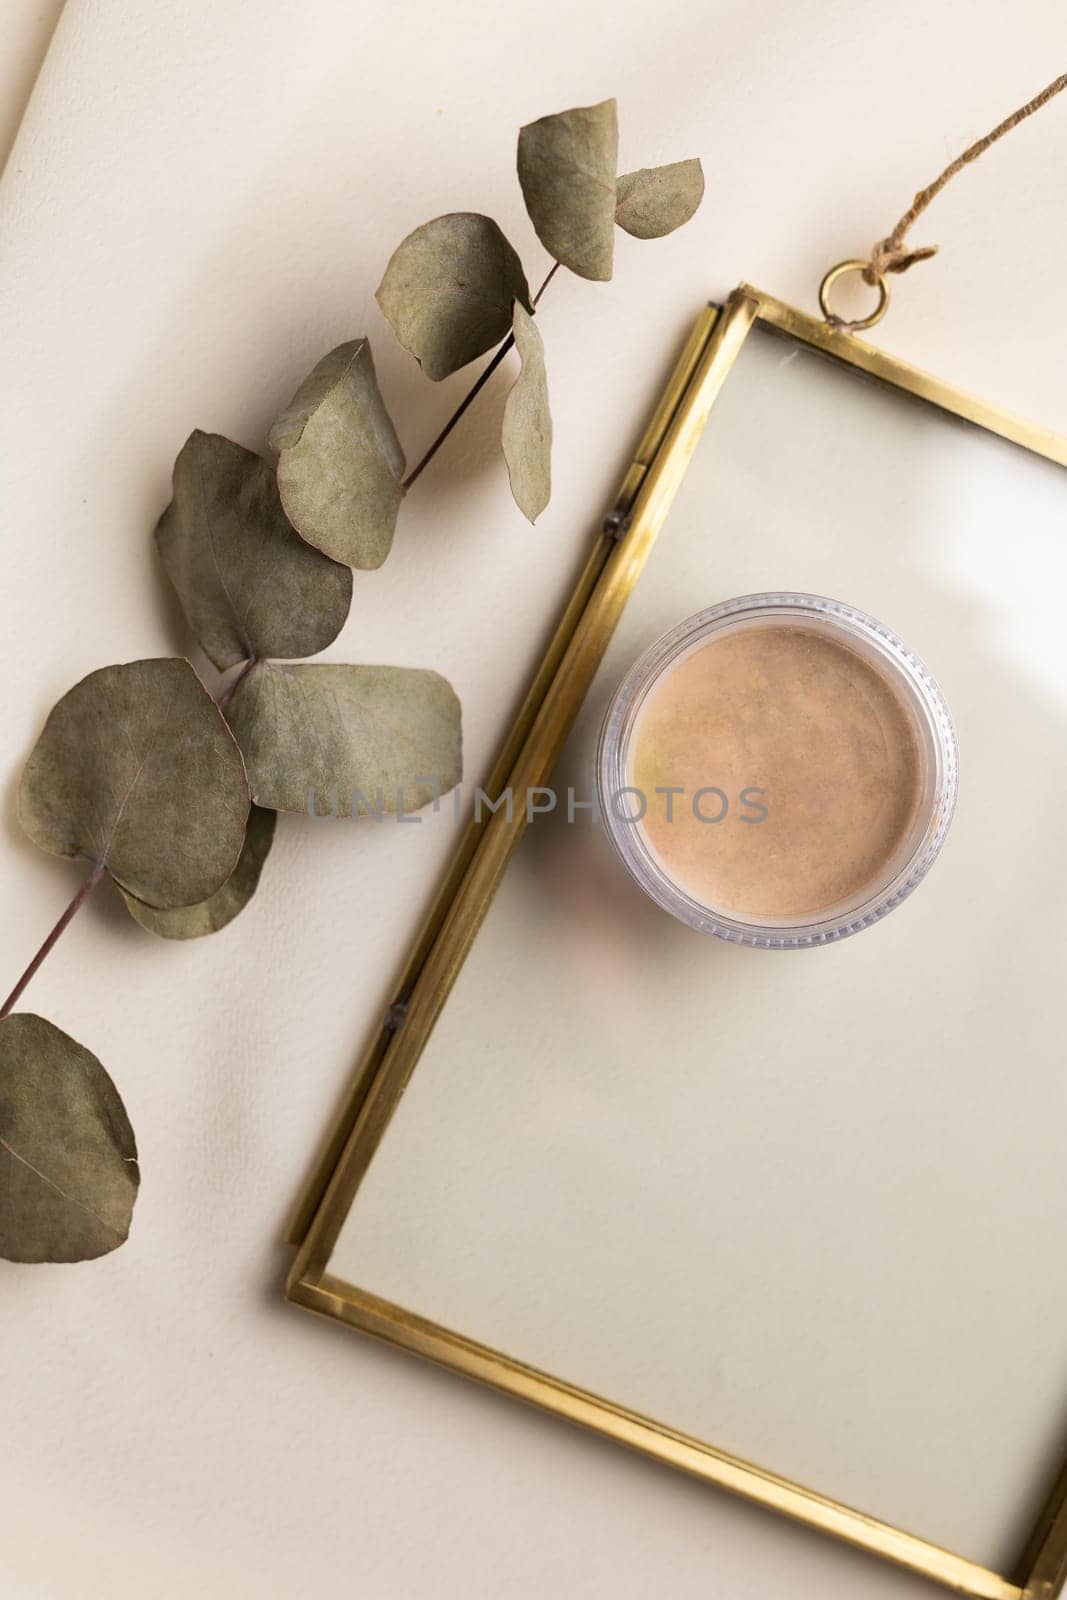 Top view facial powder on natural background with dried flowers. Aesthetics of makeup artist, make-up for yourself and beauty salon by Satura86